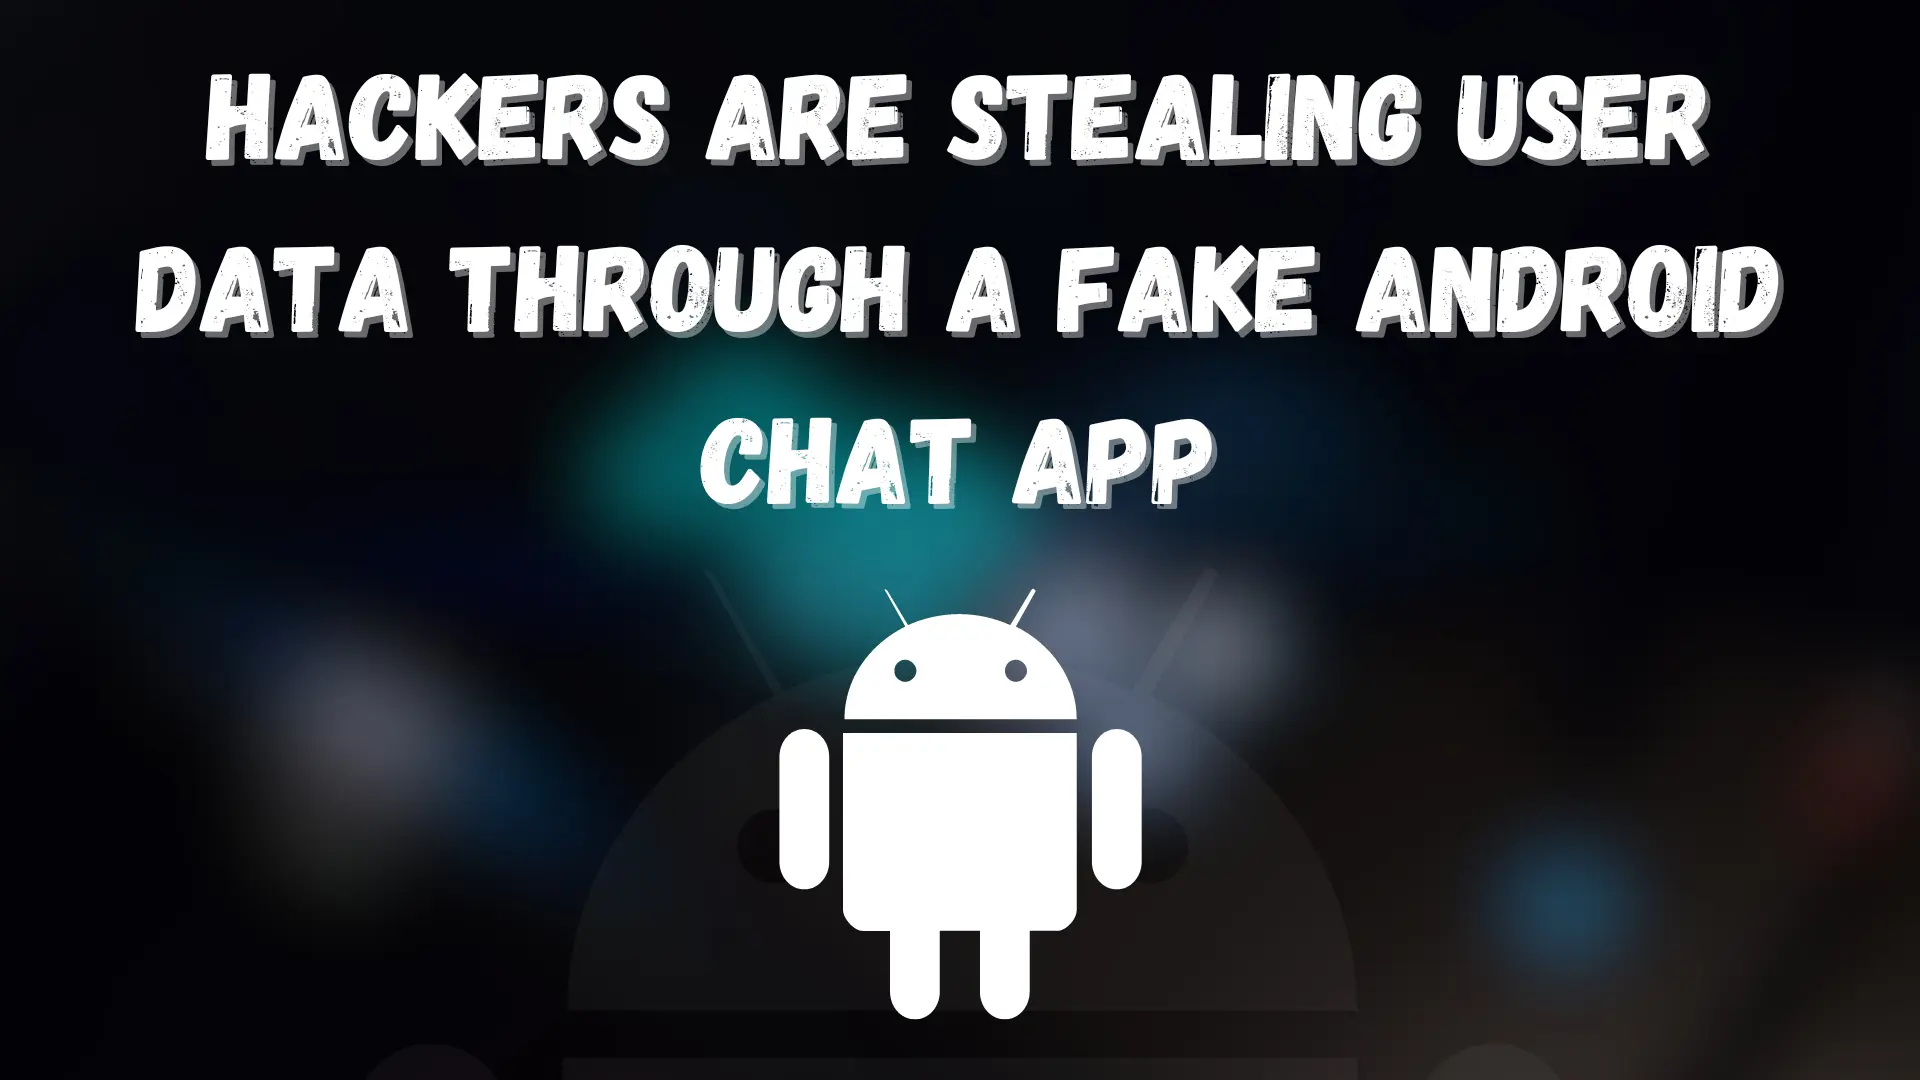 Hackers are Stealing User Data through a Fake Android Chat App